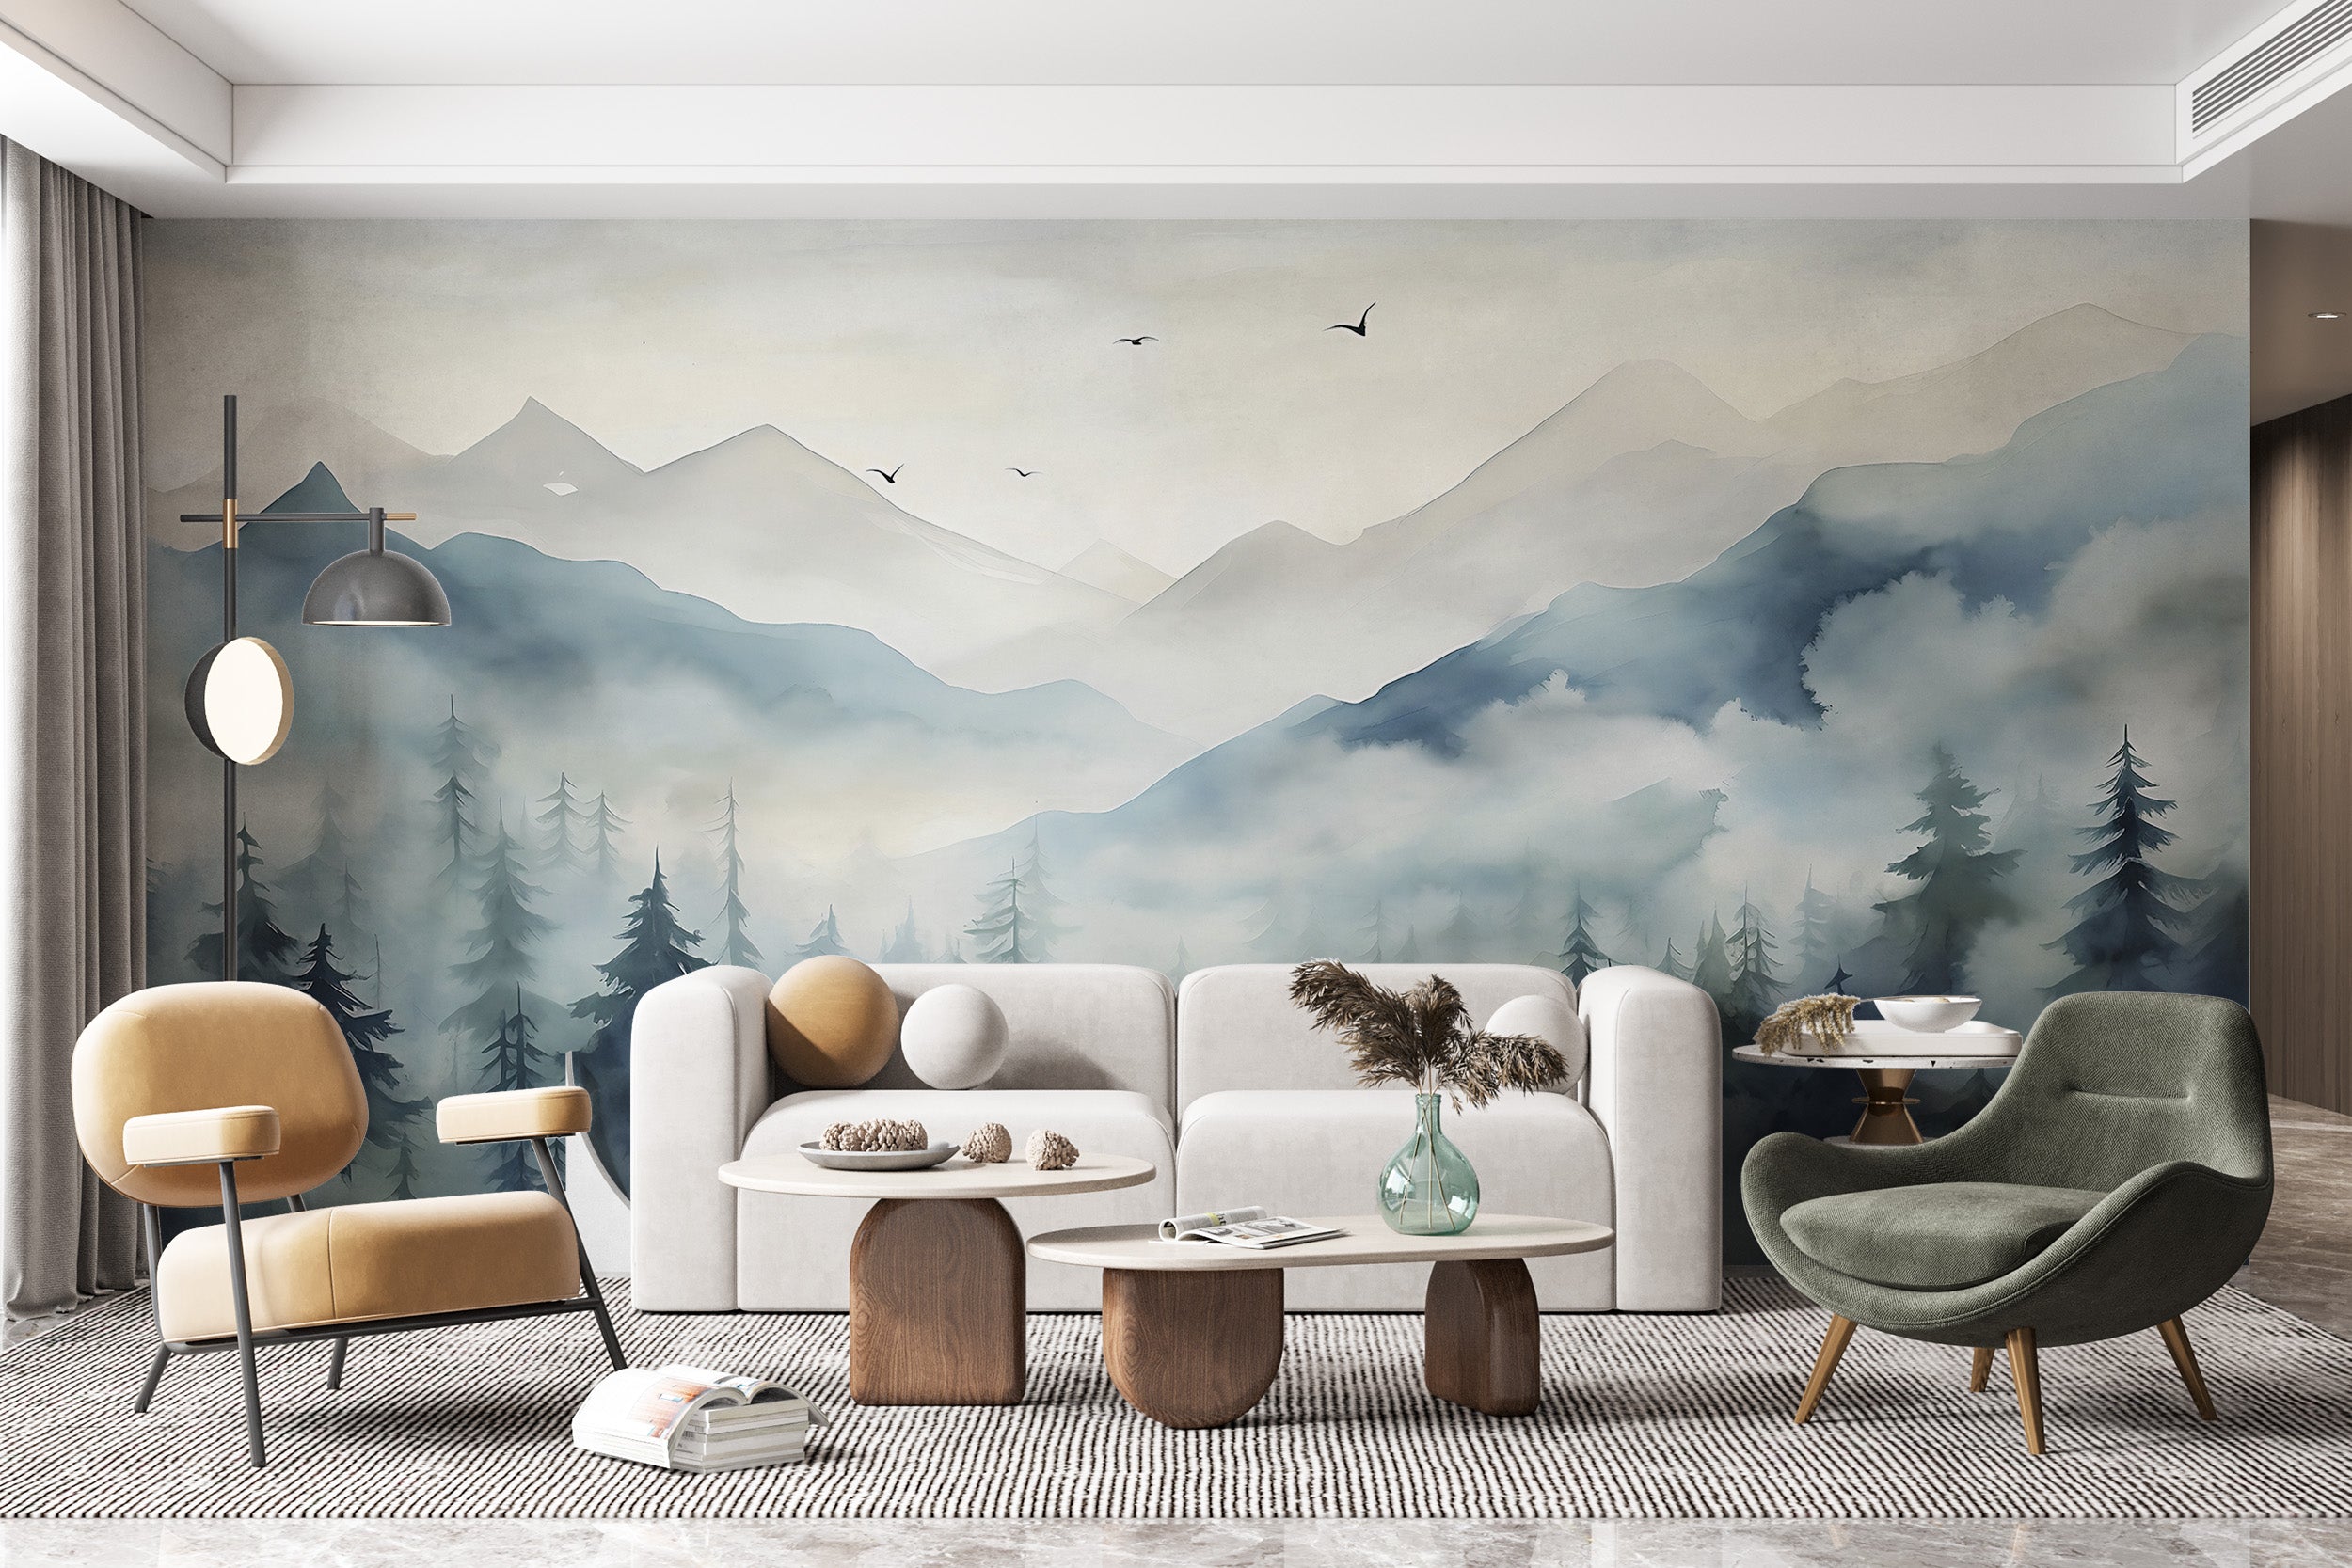 Seamless Blend of Nature and Art in Removable Mural